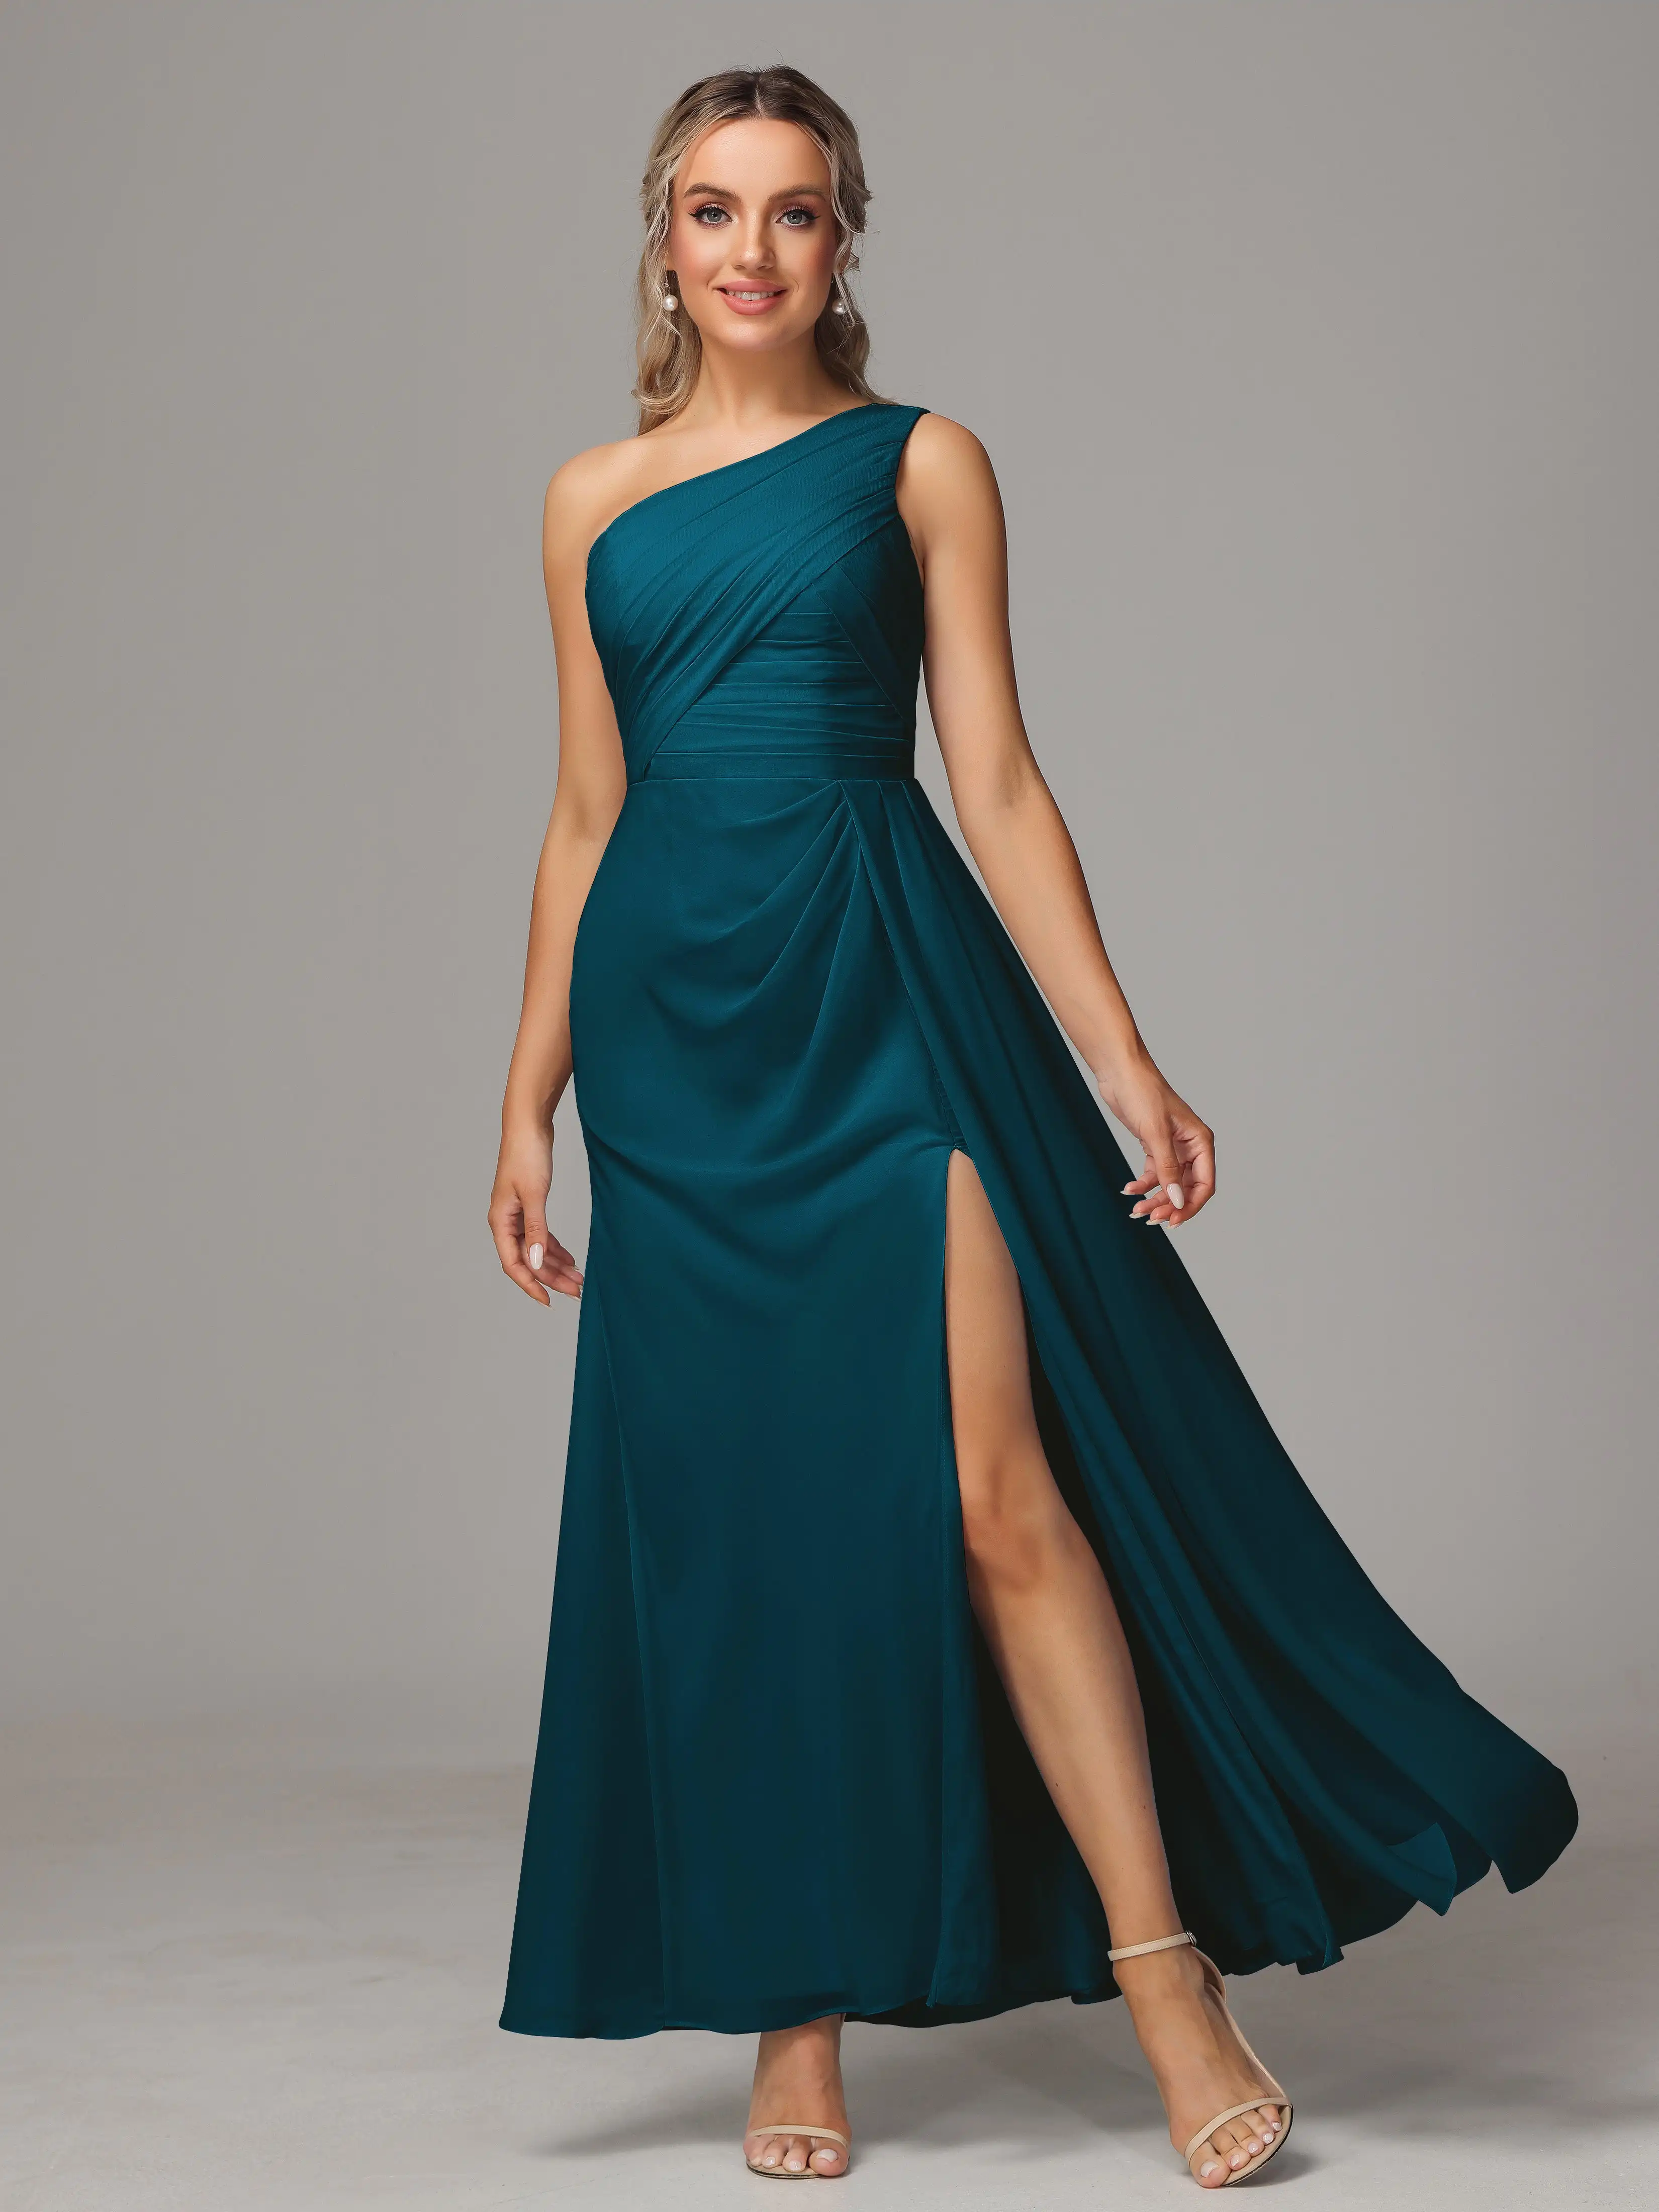 

A-Line One Shoulder Ruched Chiffon Bridesmaid Dress With Split Ankle-Length Elegant Formal Evening Party Gown Simple Prom Dress